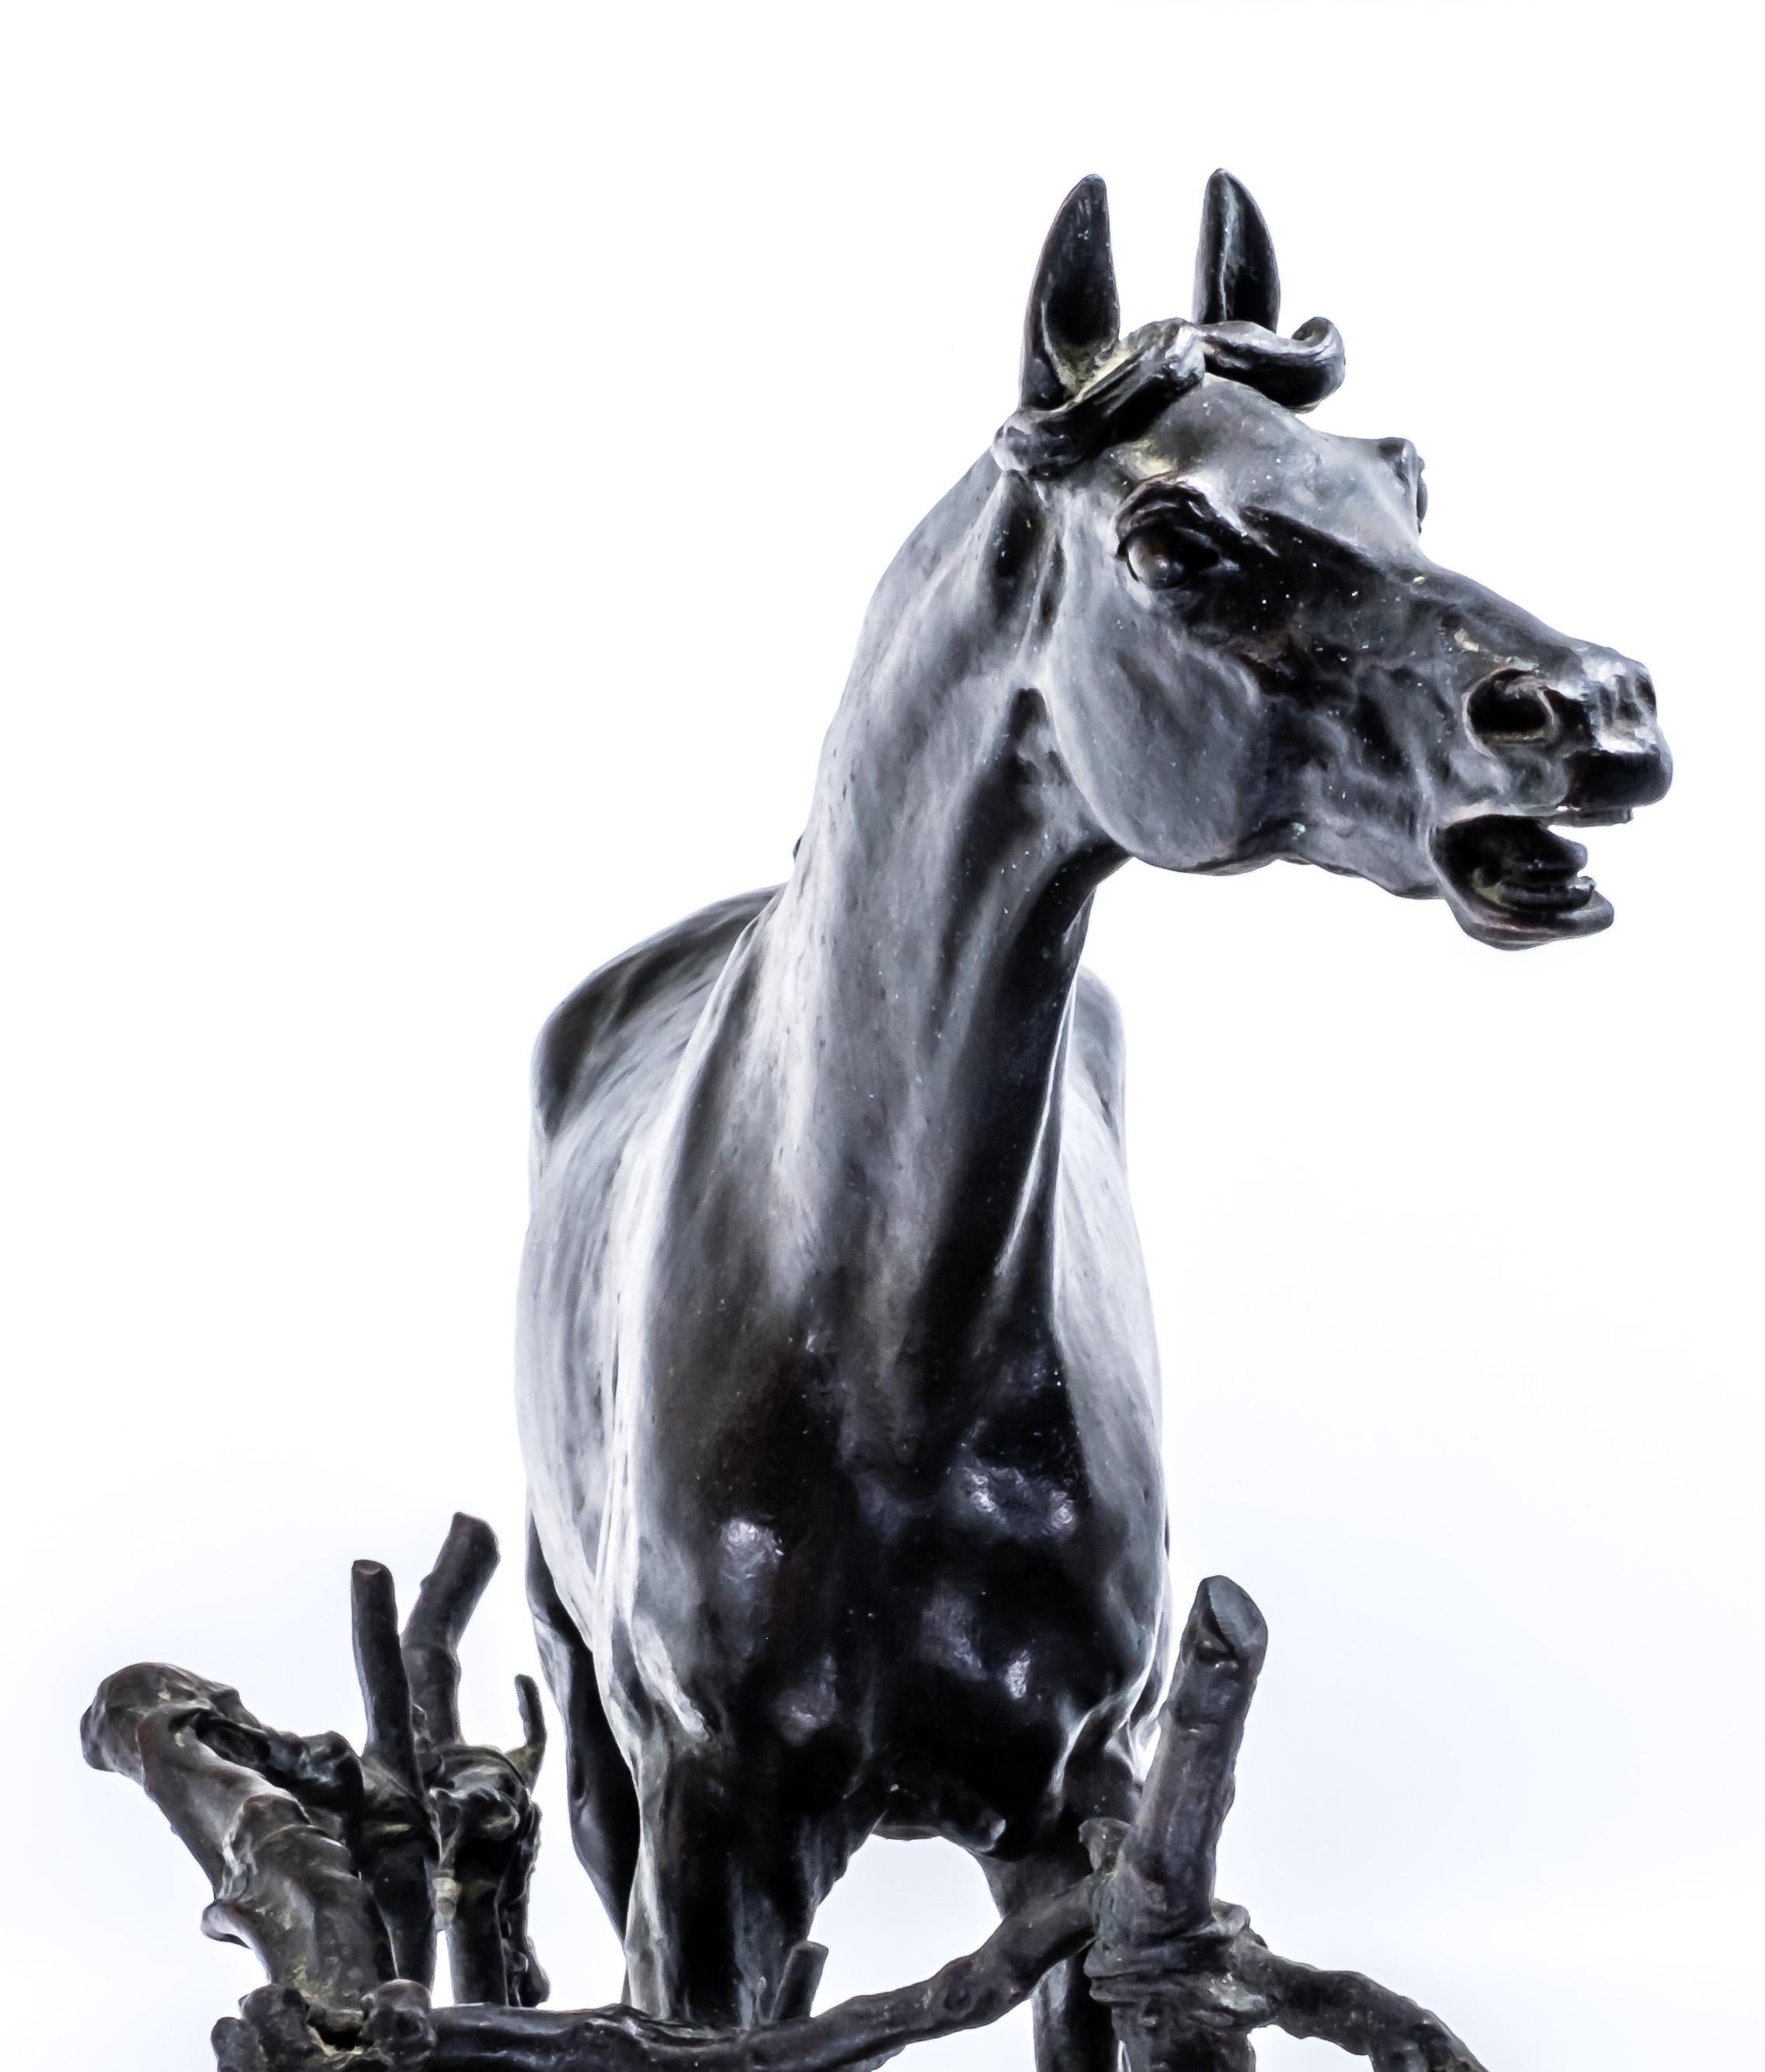 This detail-oriented cast of the French late 19th century equestrian statue represents a horse in nature with a natural wooden fence entitled “Djinn, Cheval à la Barrière” (Djinn, the Horse by the fence) by the well-known French sculptor